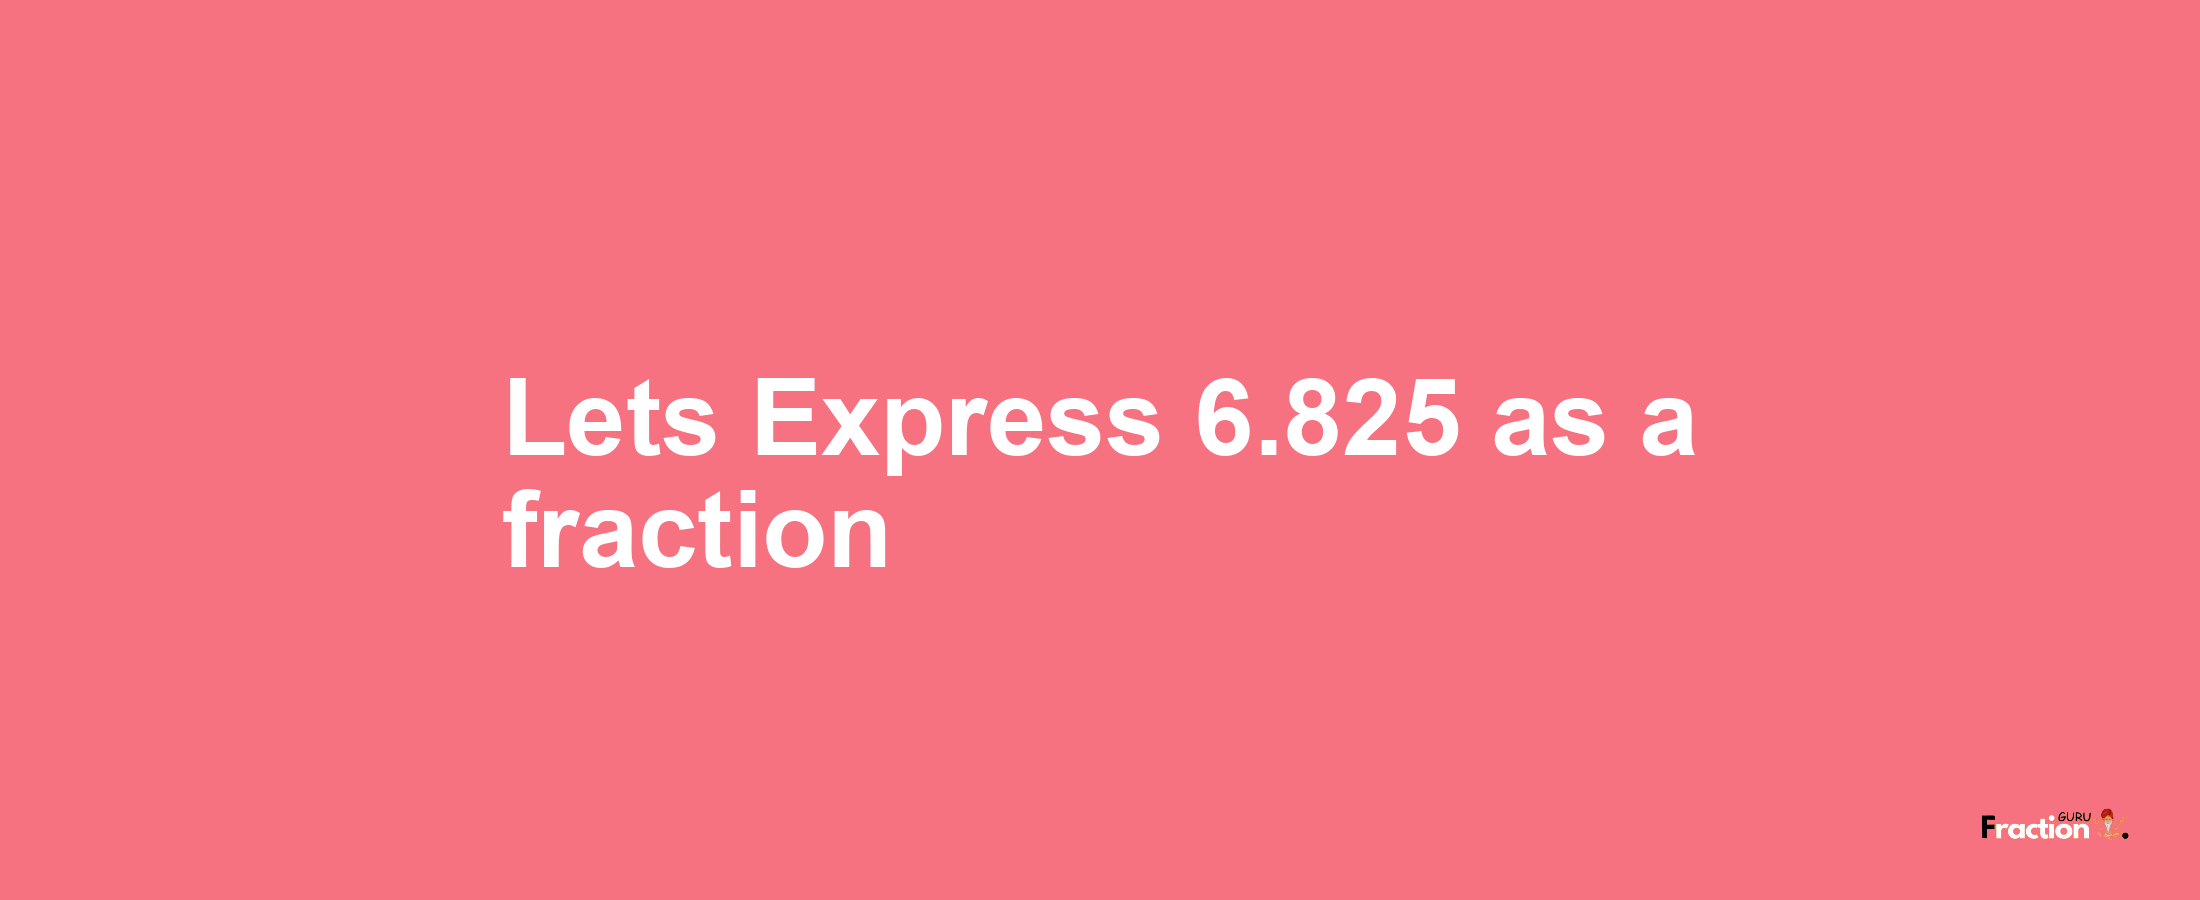 Lets Express 6.825 as afraction